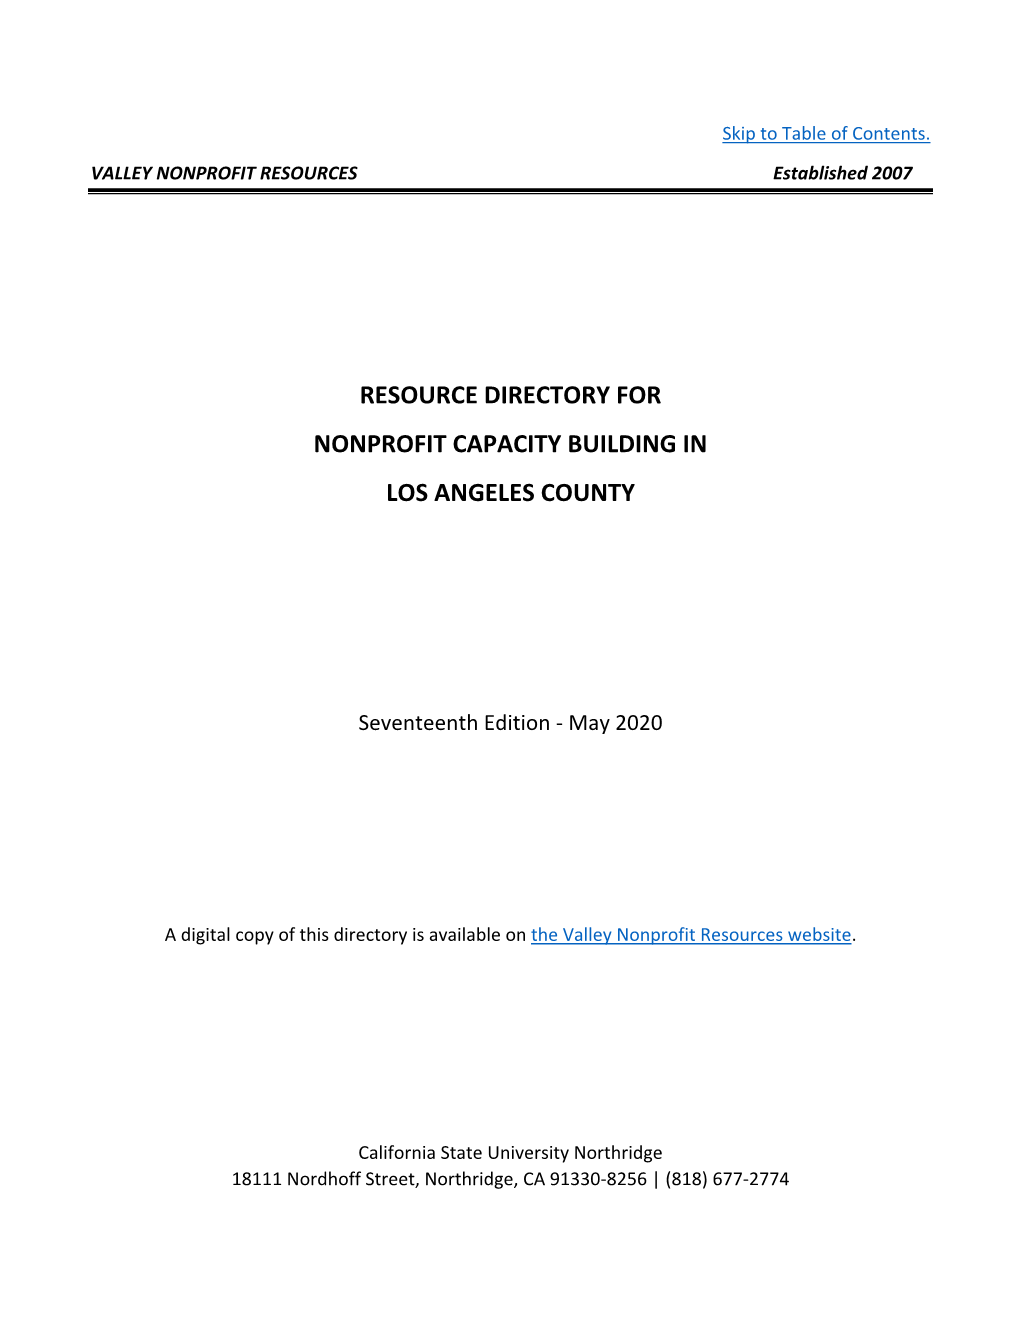 Resource Directory for Nonprofit Capacity Building in Los Angeles County